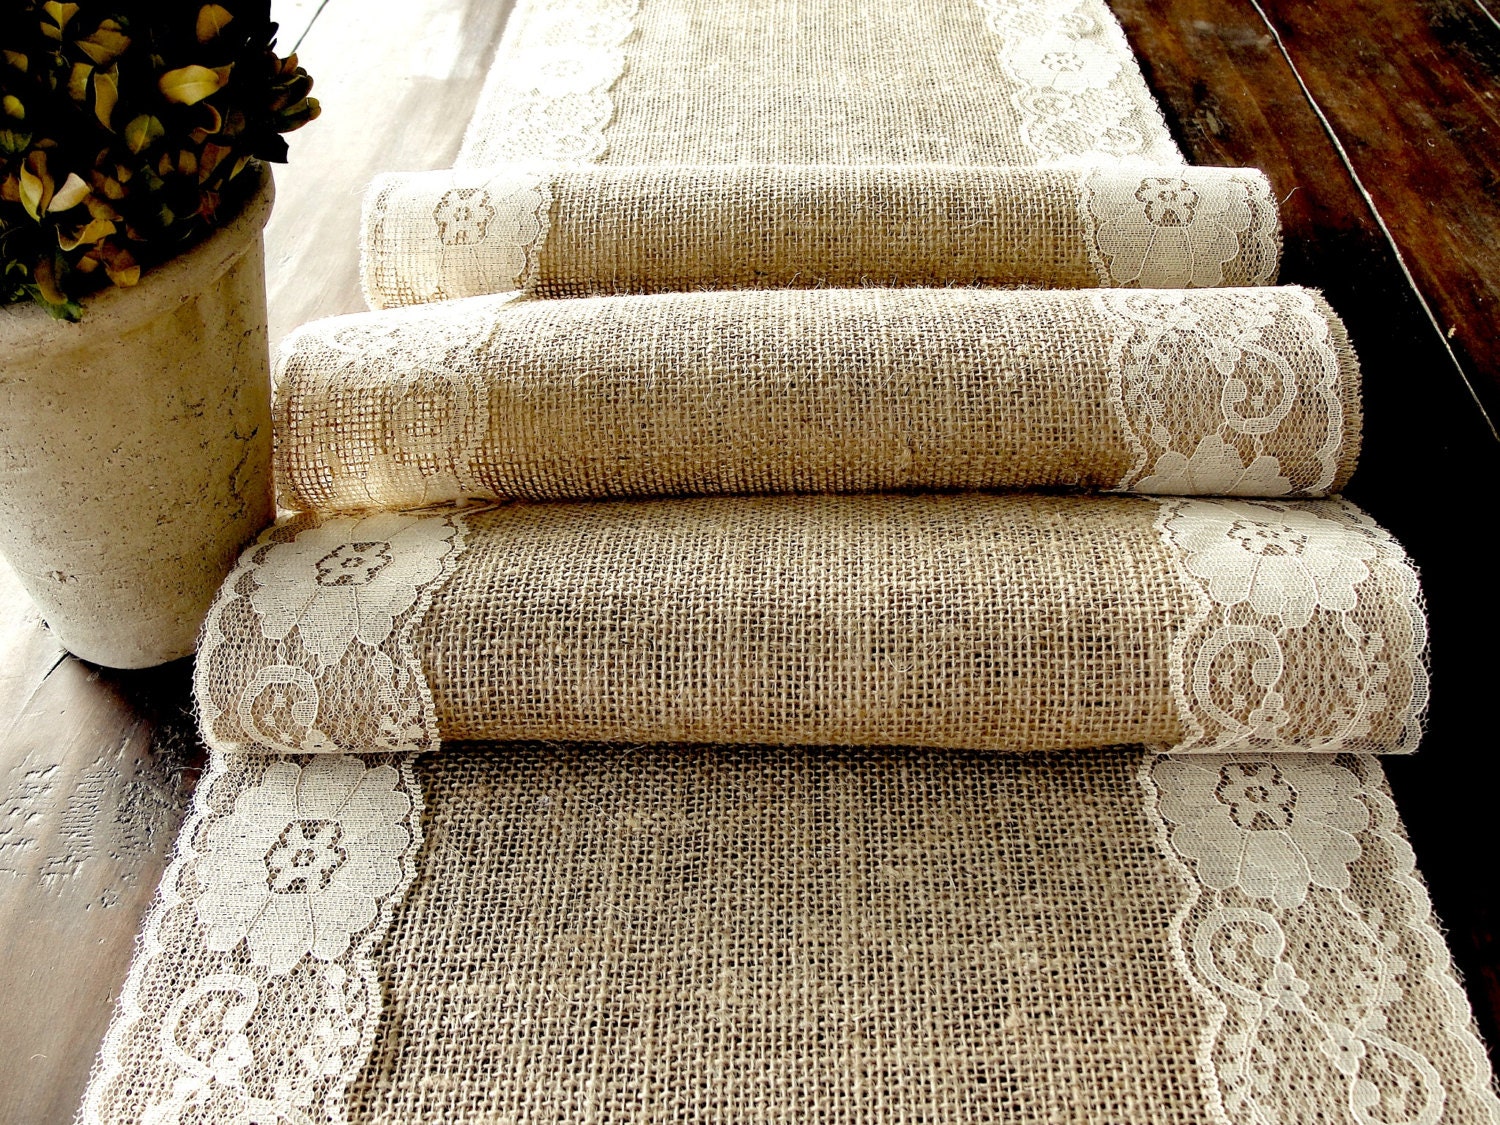 Wedding table runner burlap table runner with country cream lace rustic chic , handmade in the USA - HotCocoaDesign